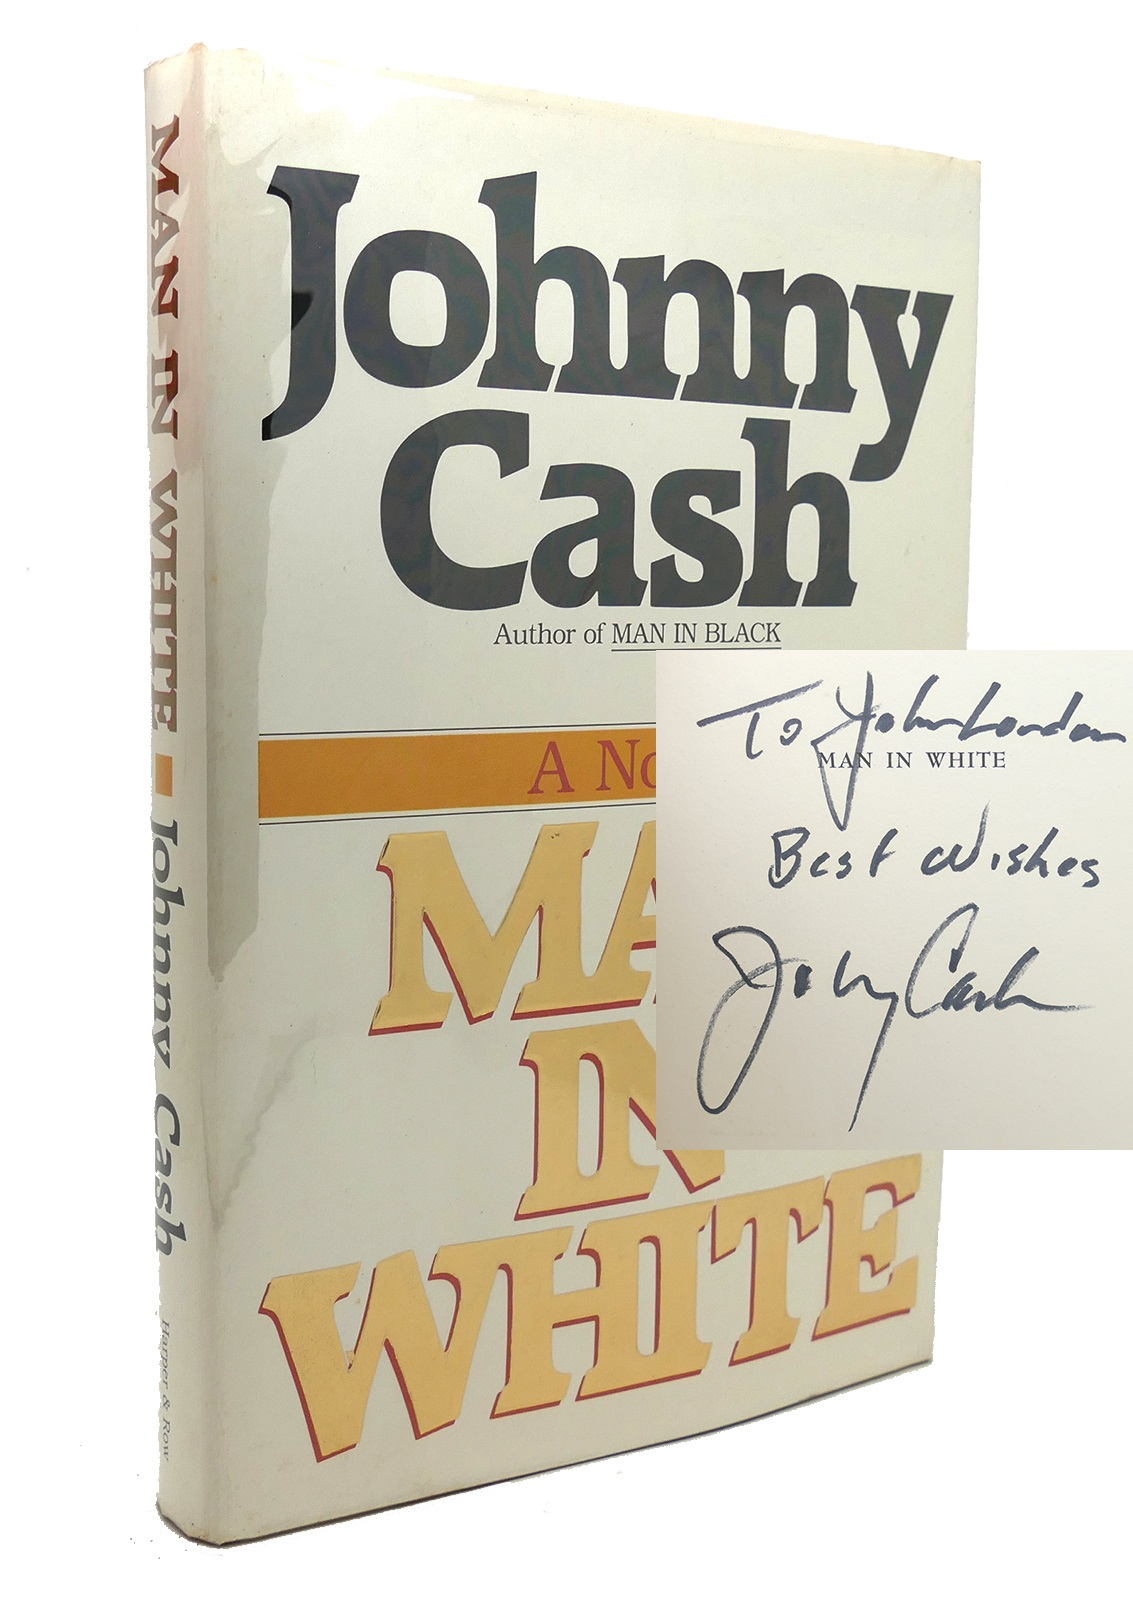 MAN IN WHITE Signed 1st - Johnny Cash